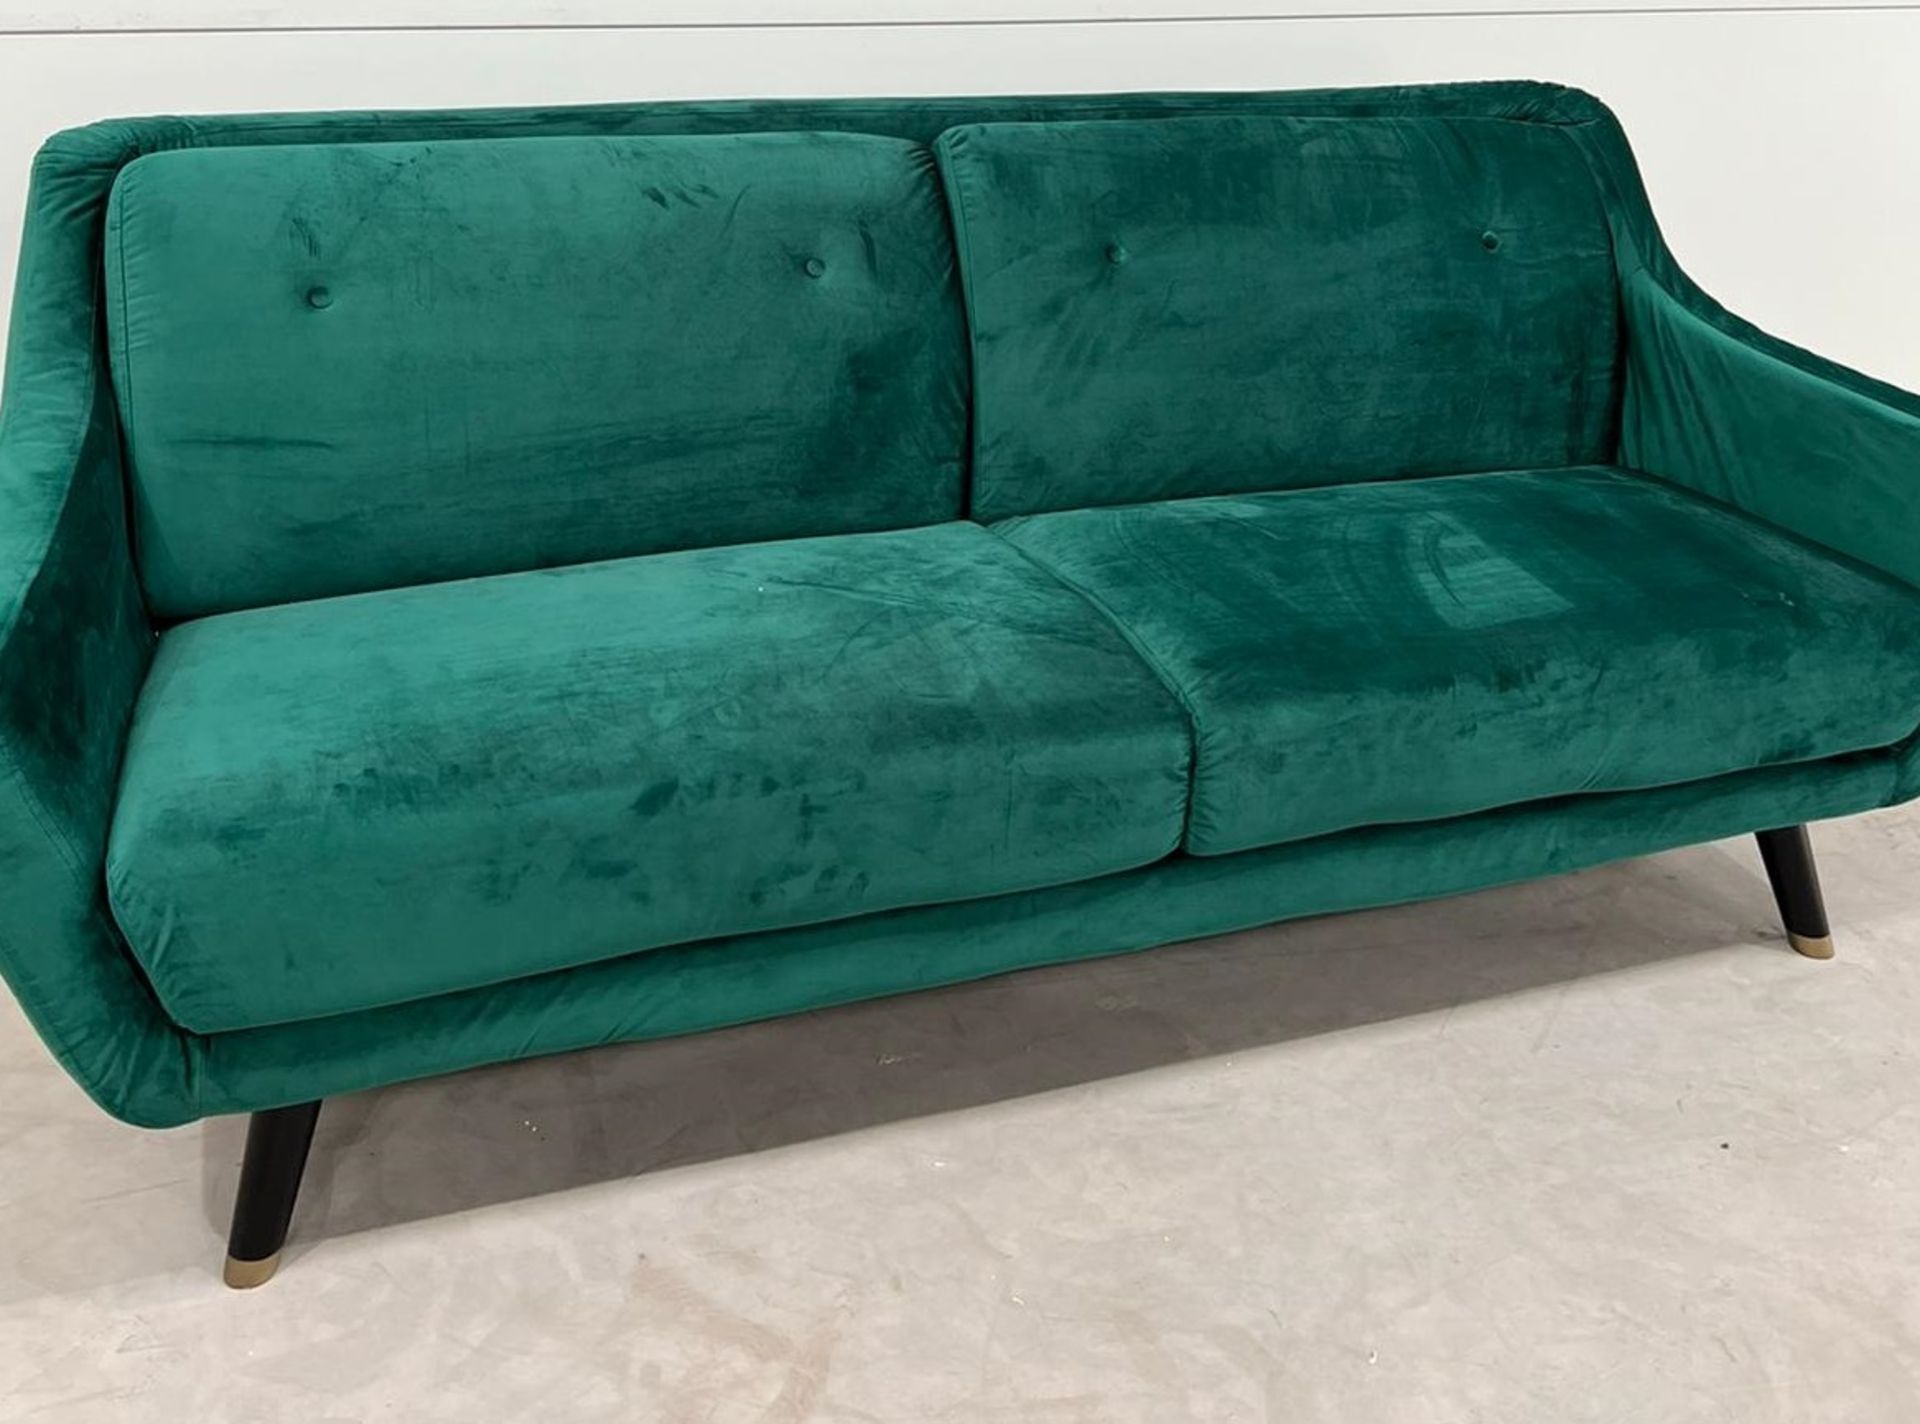 Lance Three Seater Sofa In Green Velvet Legs Finished In Black Legs This Welcoming Shape Is Hugged - Bild 3 aus 3